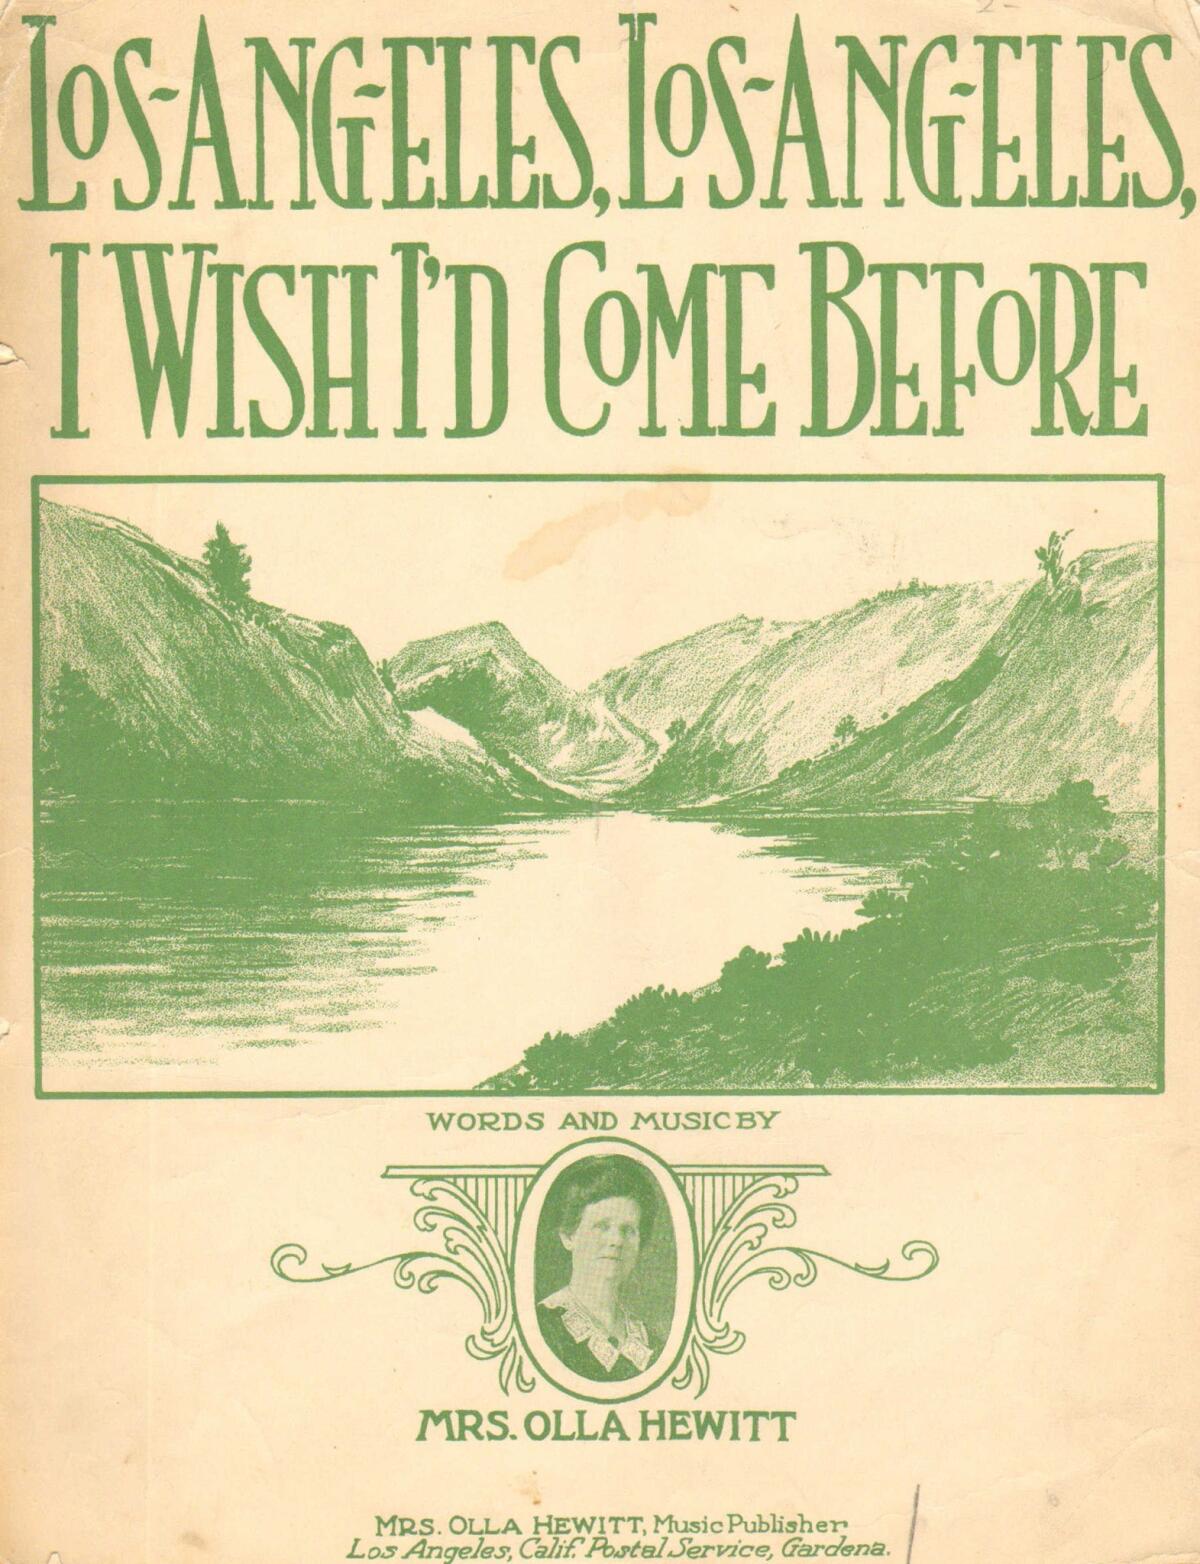 Sheet-music cover has an illustration of mountains and a lake.